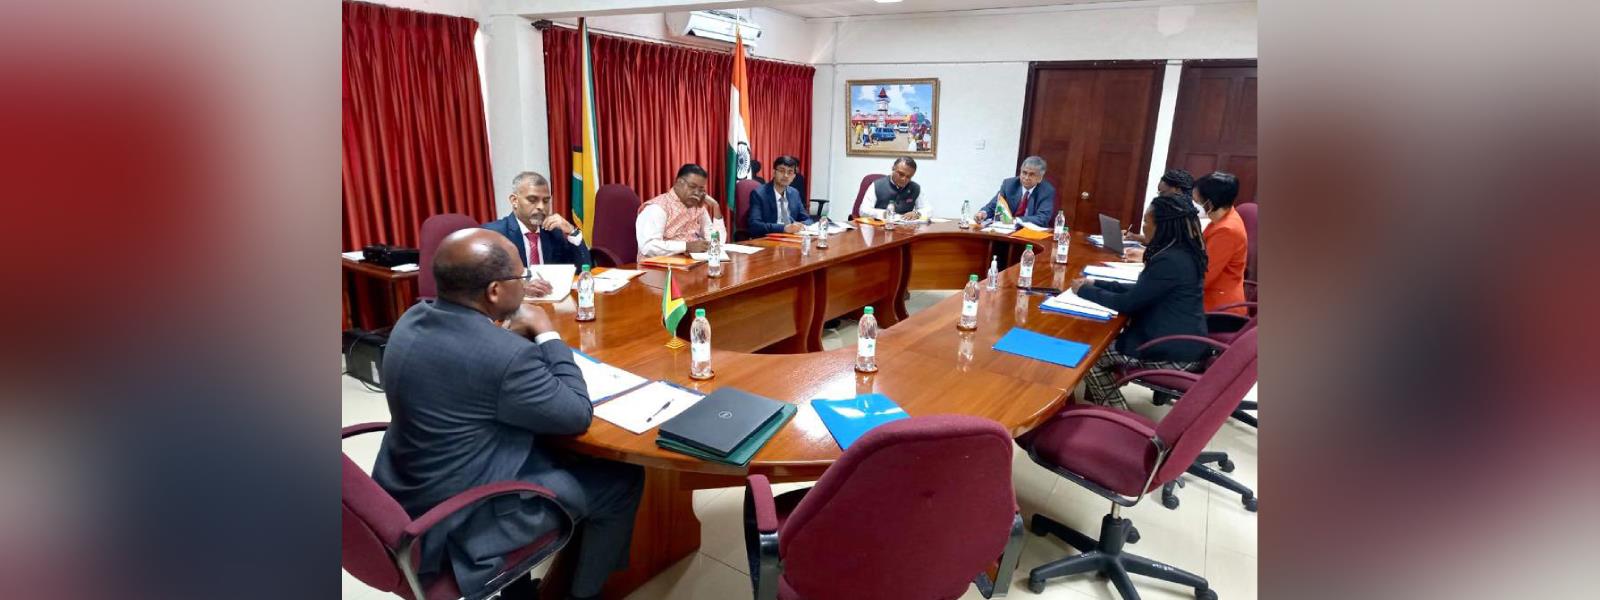 4th India-Guyana Foreign Office  Consultation held in Georgetown.